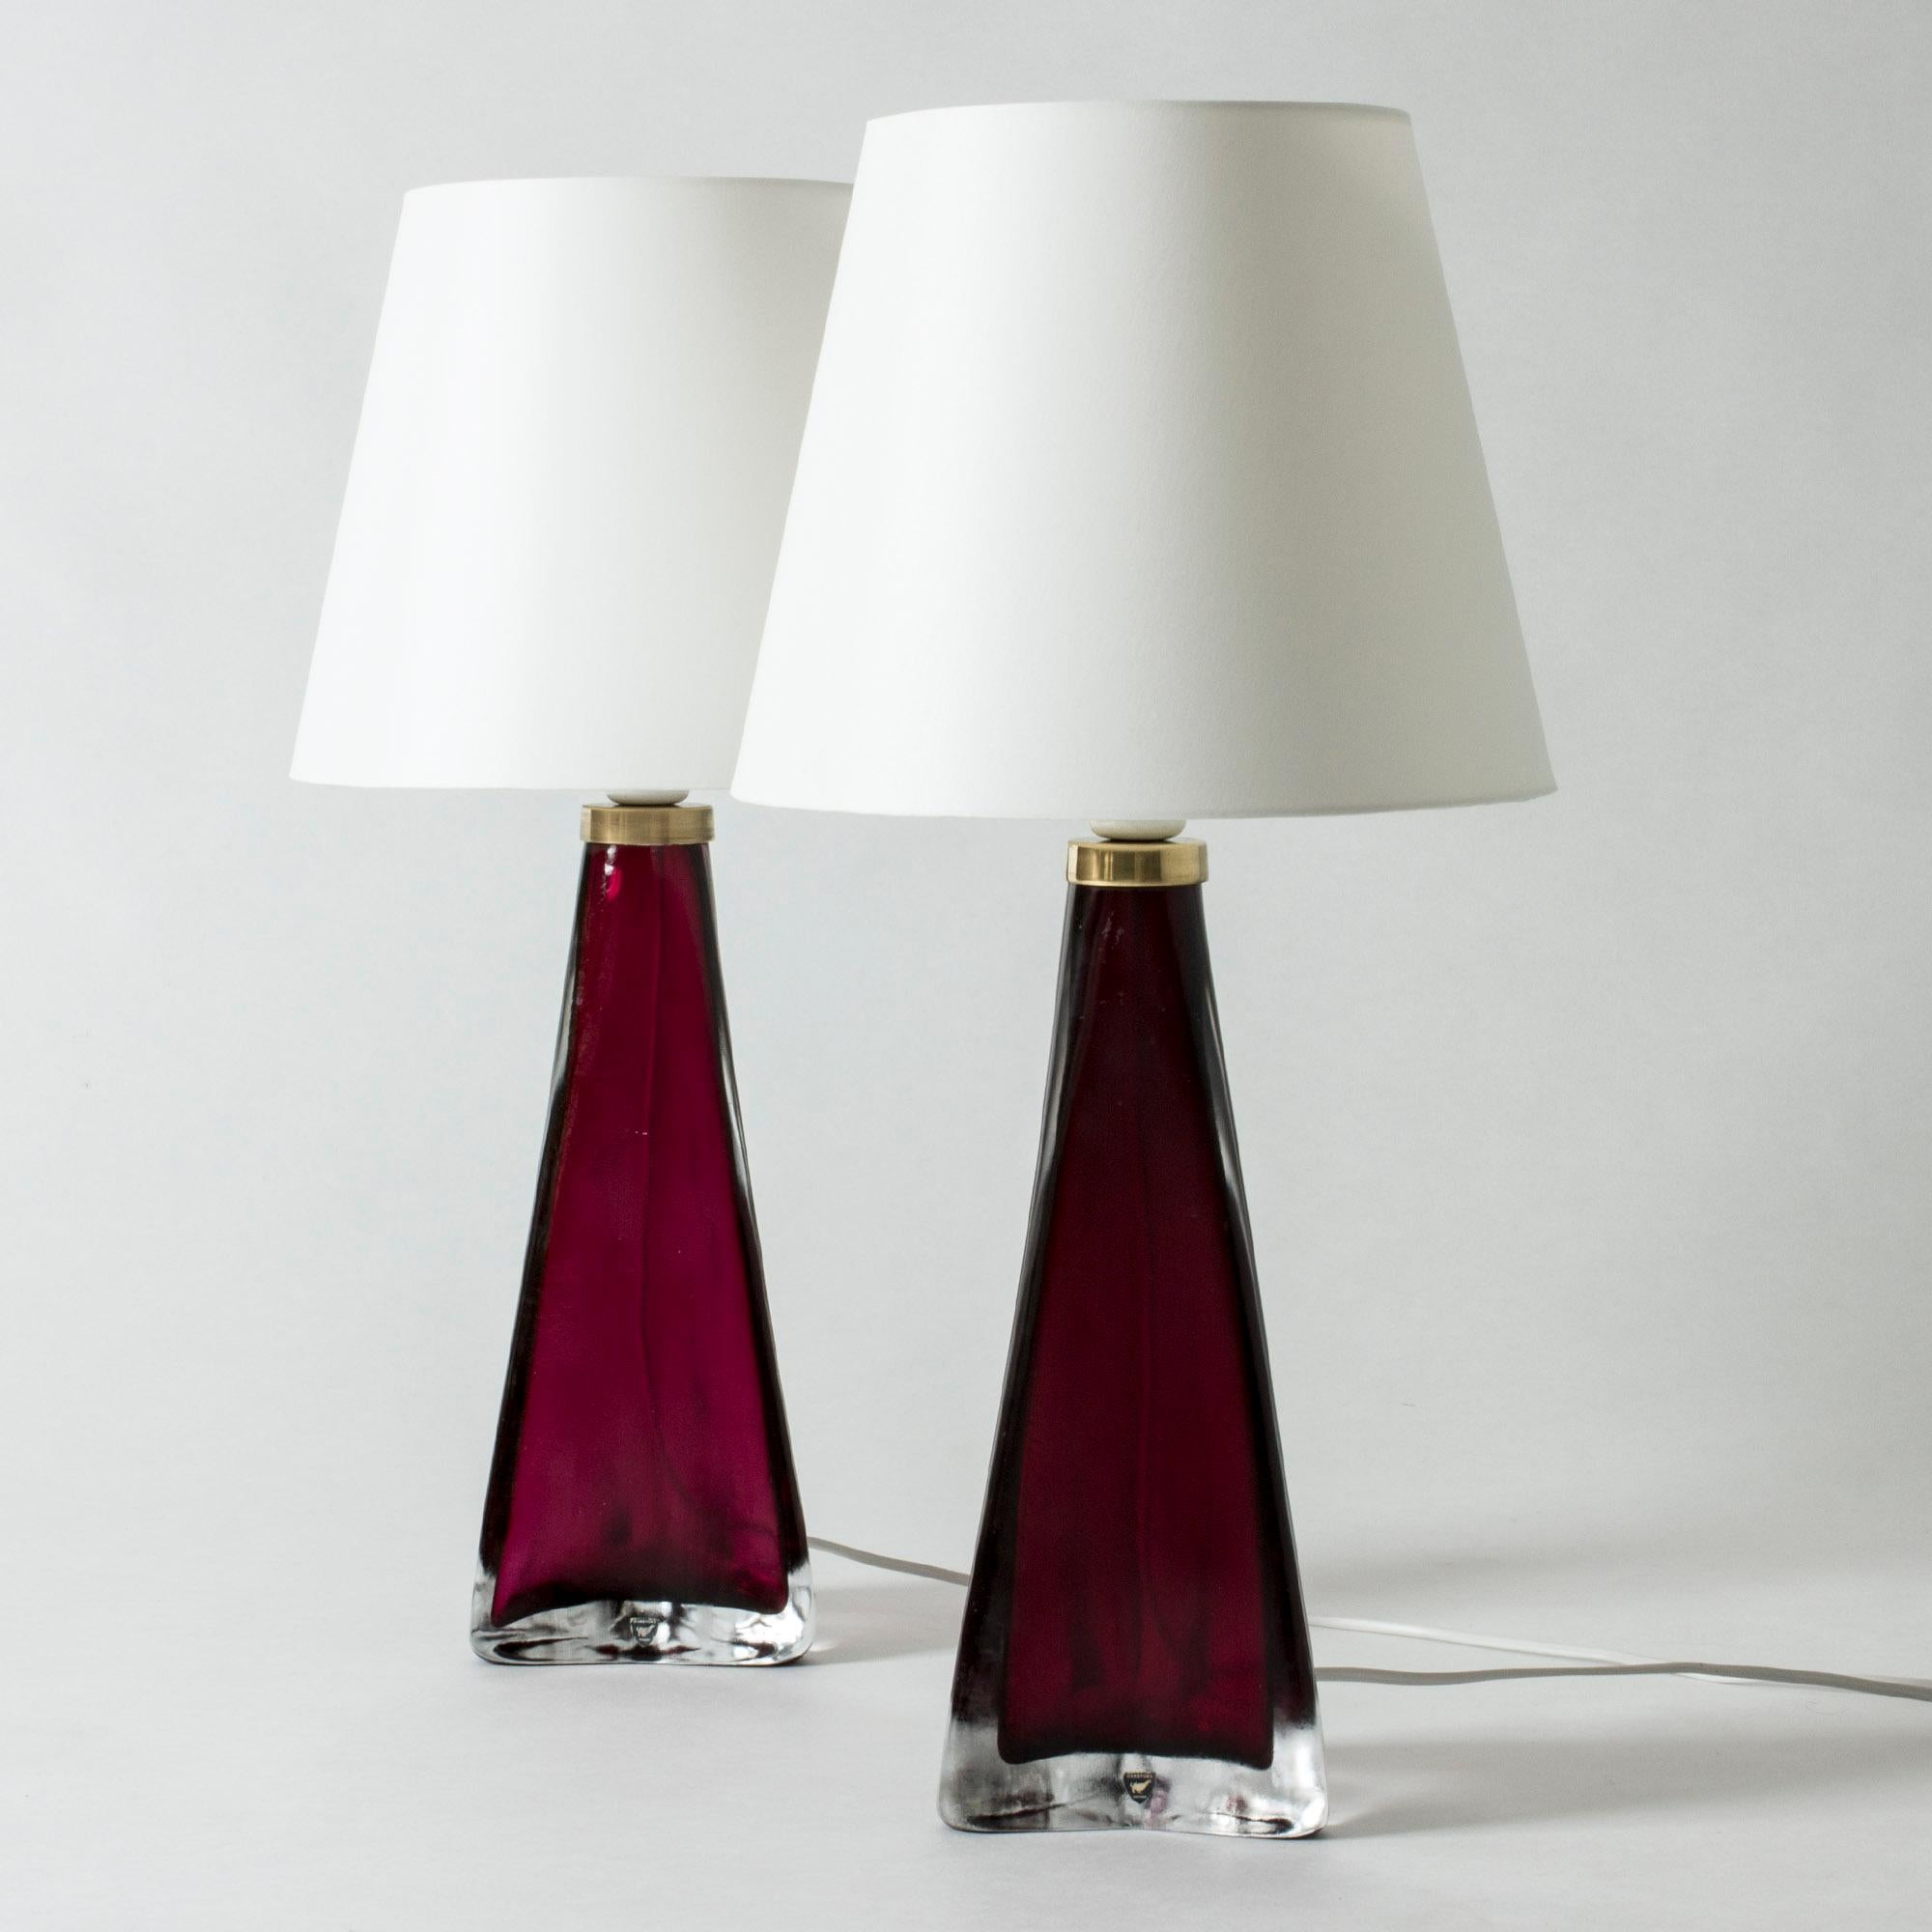 Pair of cool and luxurious table lamps by Carl Fagerlund, made in beautiful dark pink and clear glass. Tapering shape with a triangular base. Slightly frosted surface with structure. Rare color.